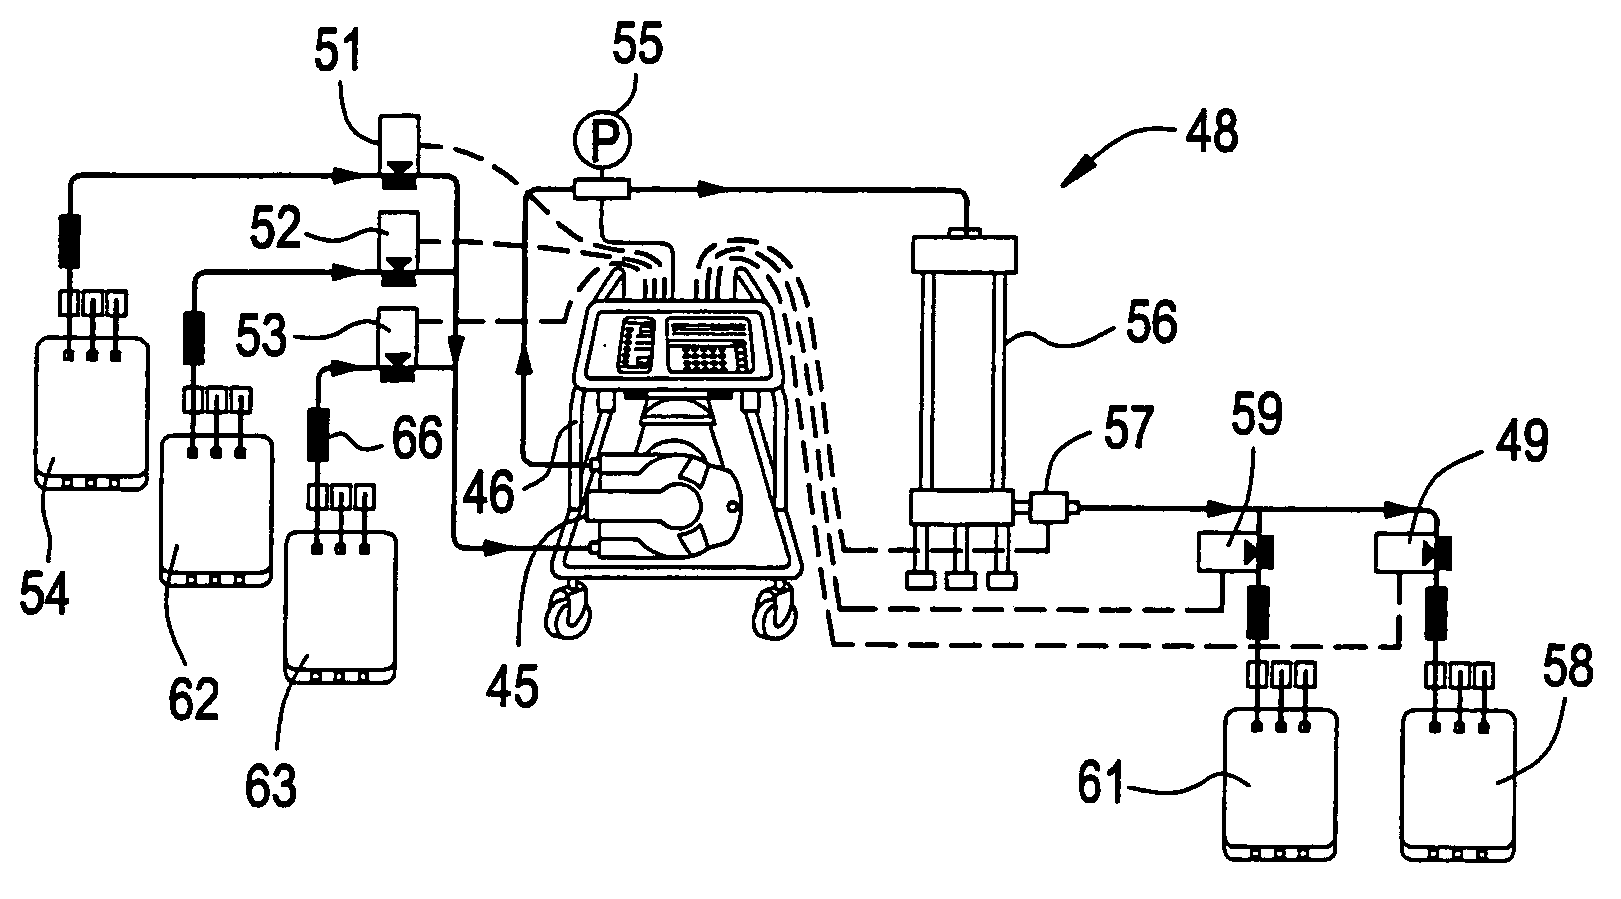 Single-use manifold for automated, aseptic transfer of soulutions in bioprocessing applications